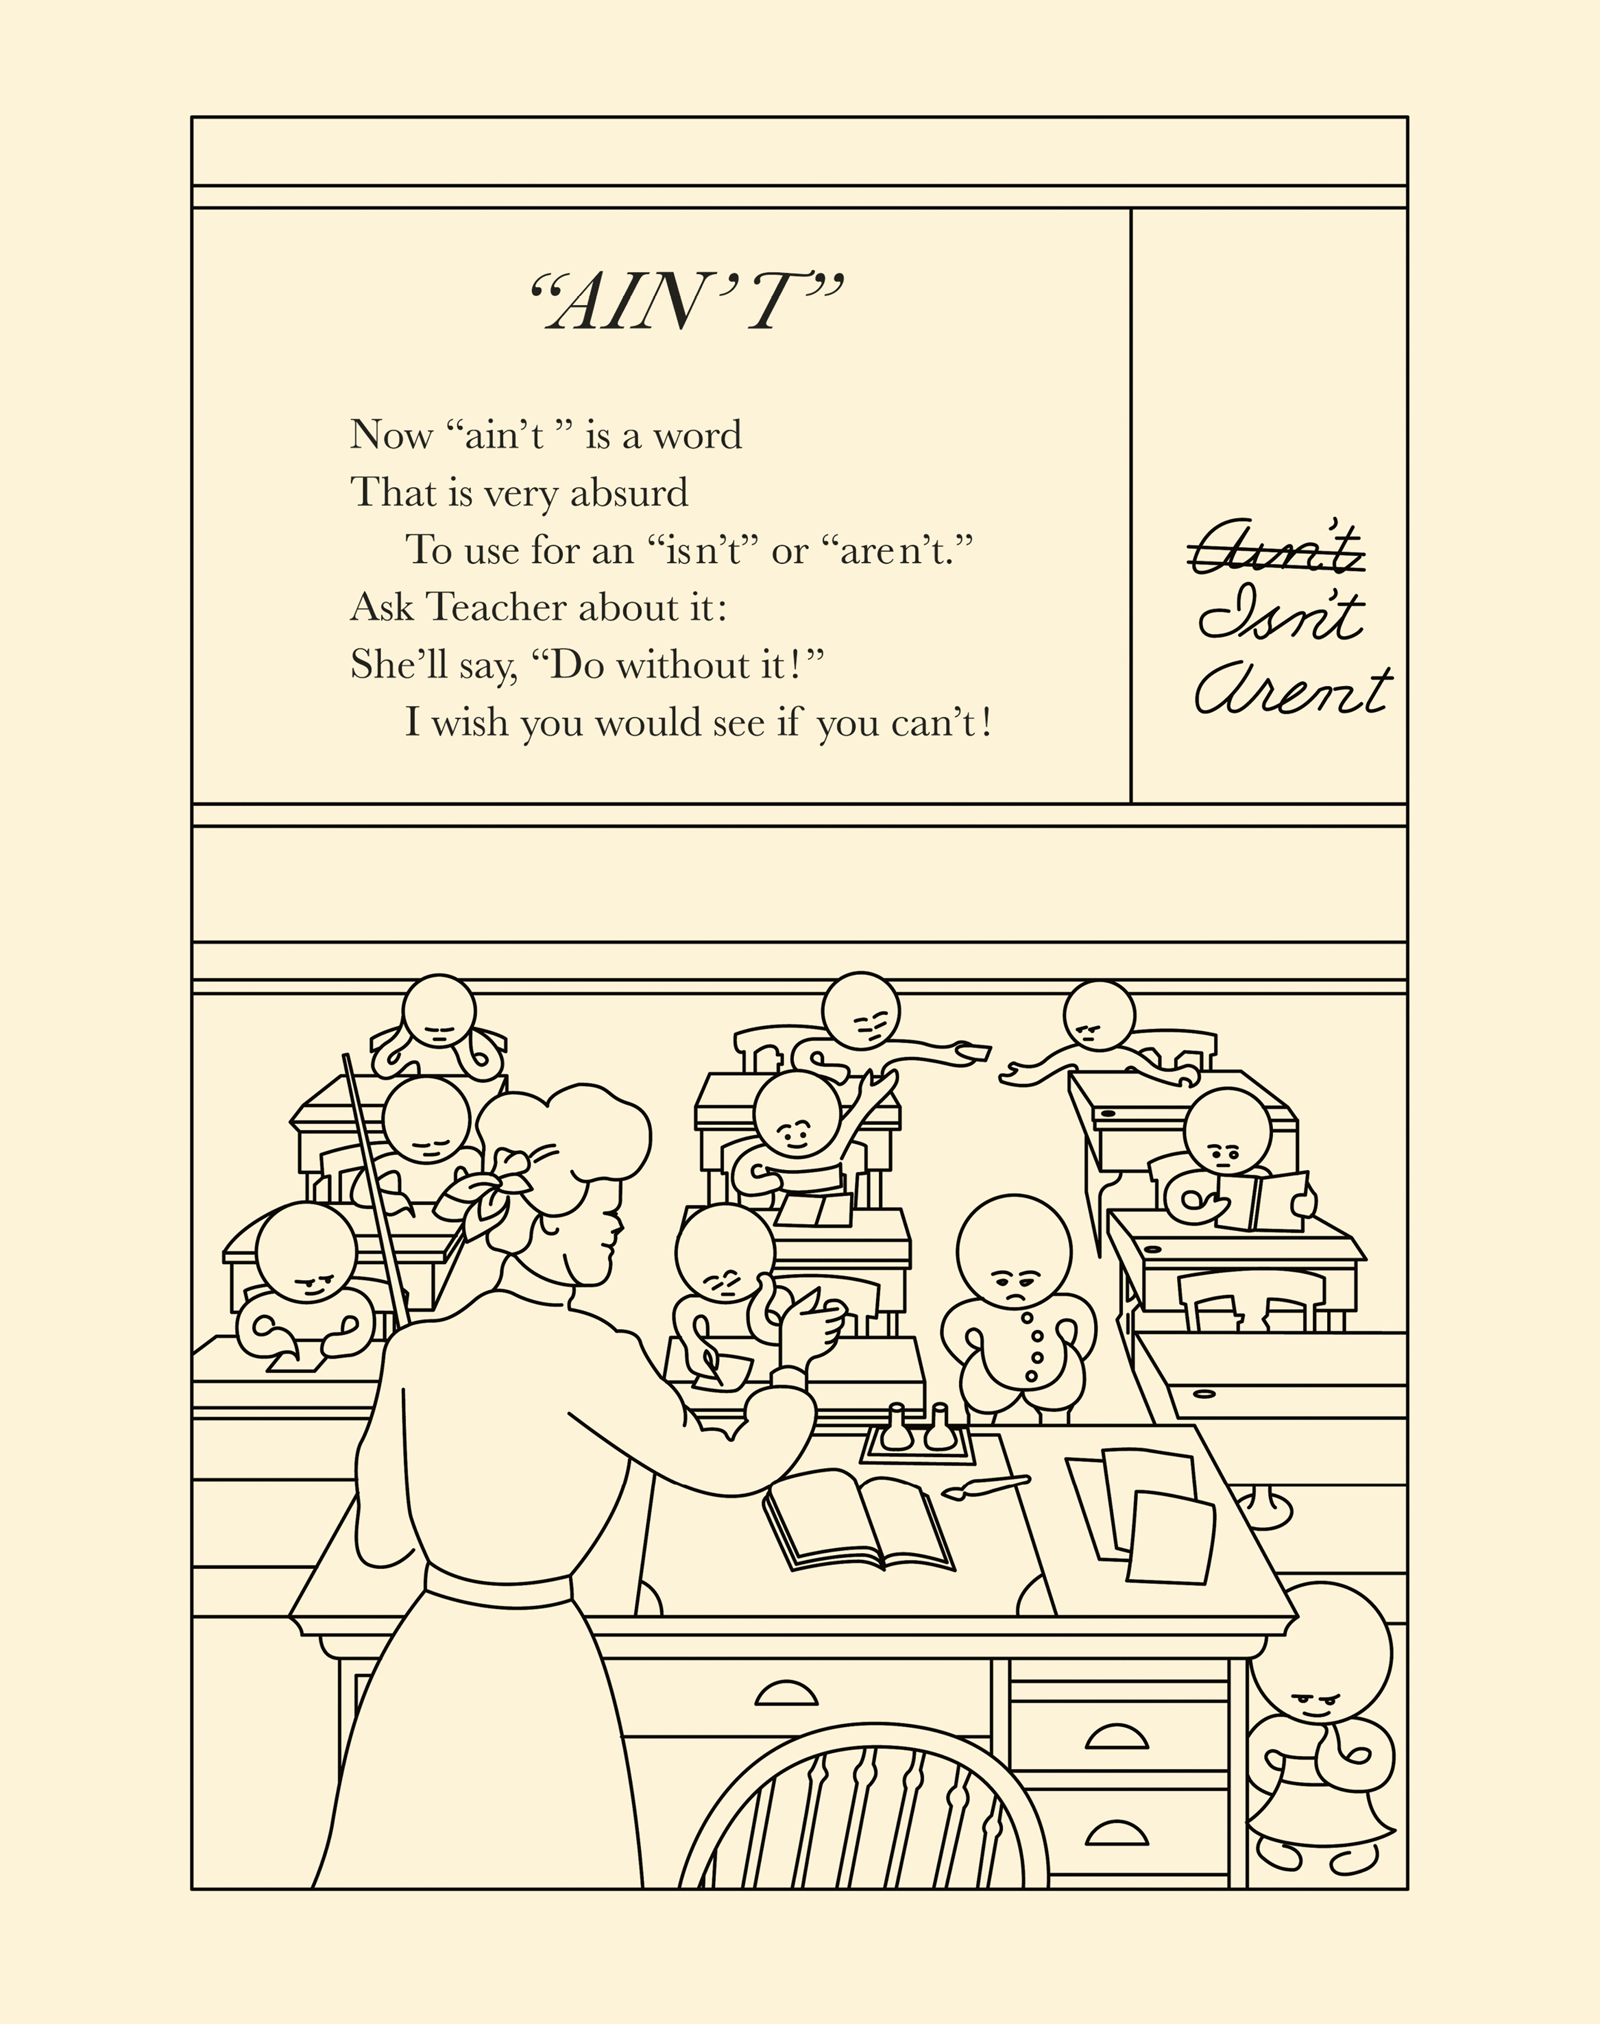 A page from Gelett Burgess’s nineteen oh three work titled “More Goops and How Not to Be Them,” depicting an illustration of a classroom in which the blackboard admonishes children for using the word “Ain’t.”  